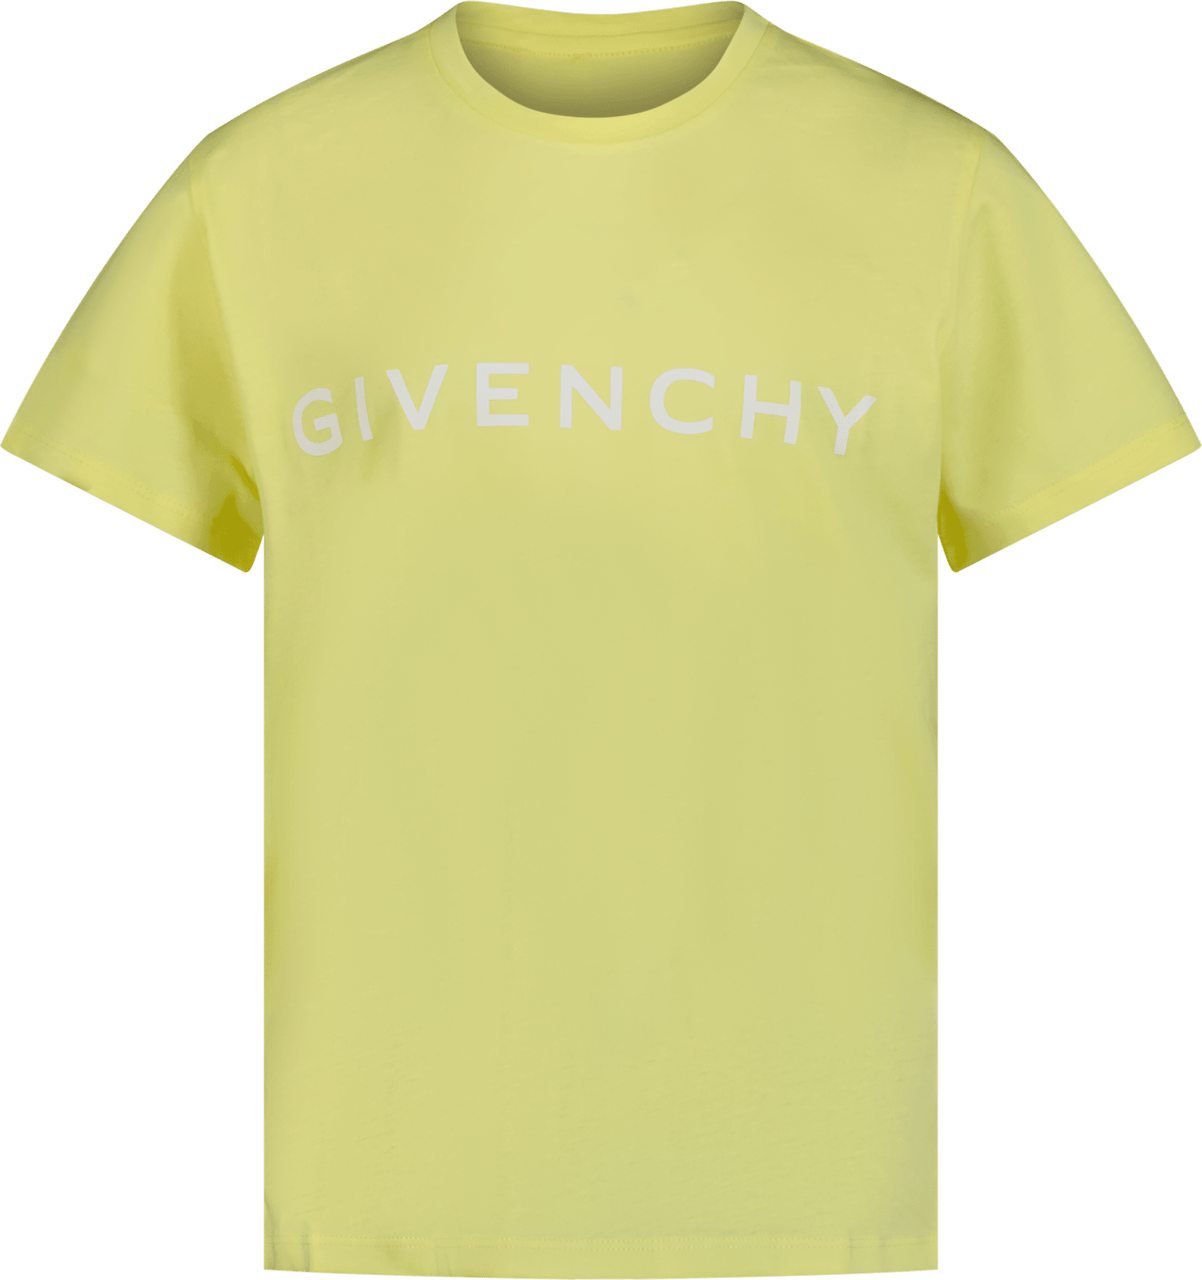 Givenchy Givenchy Kinder Meisjes T-Shirt Geel Geel